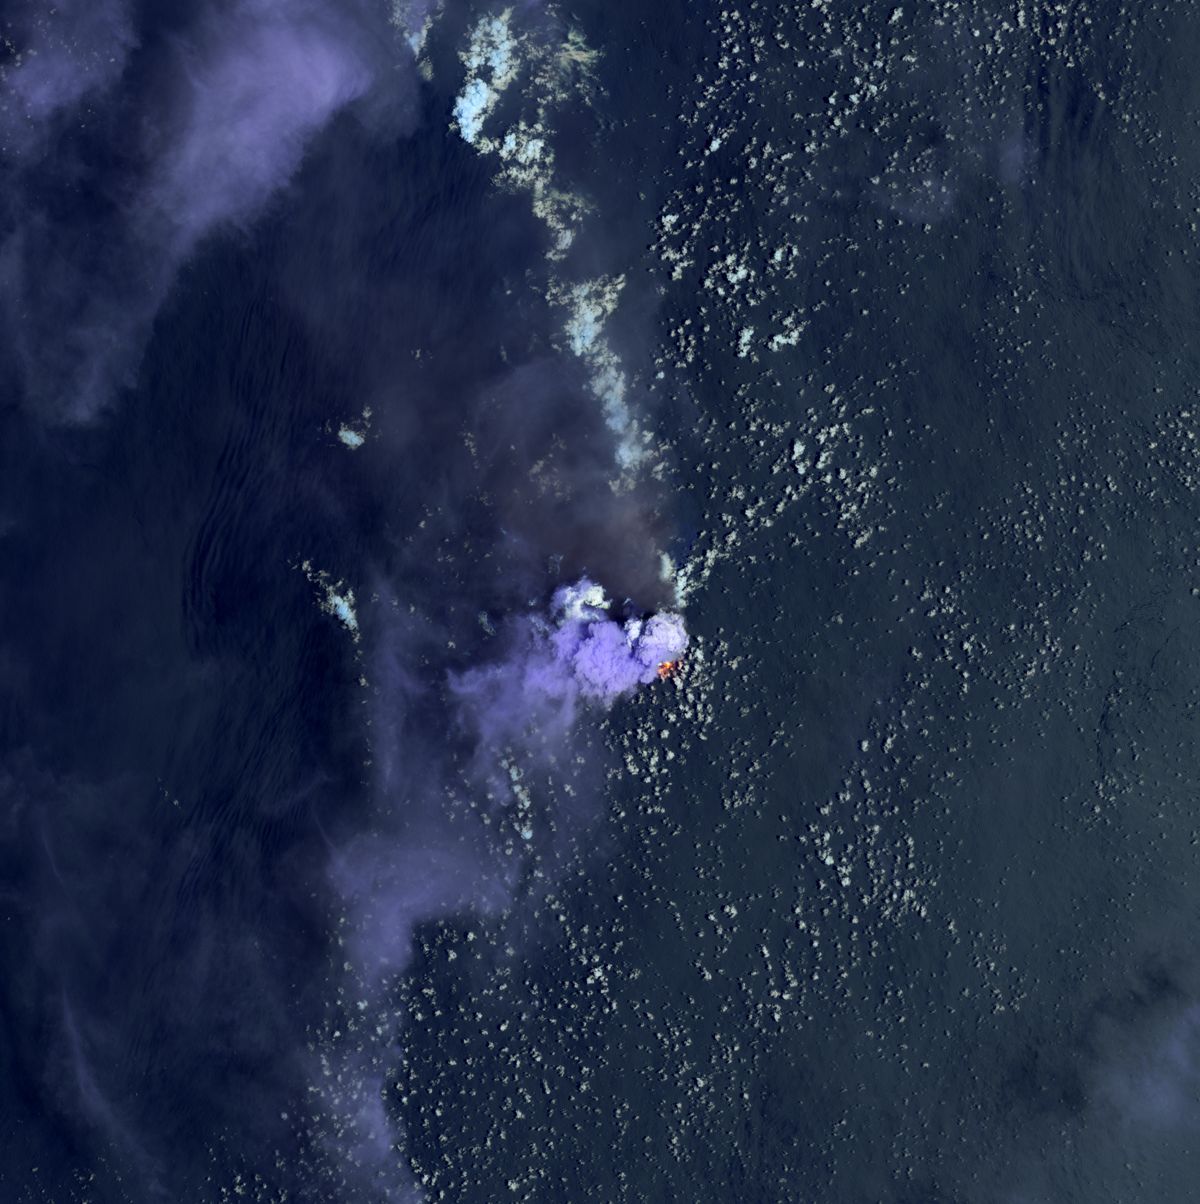 Volcanic island spewing ash and lava spotted from space | Space